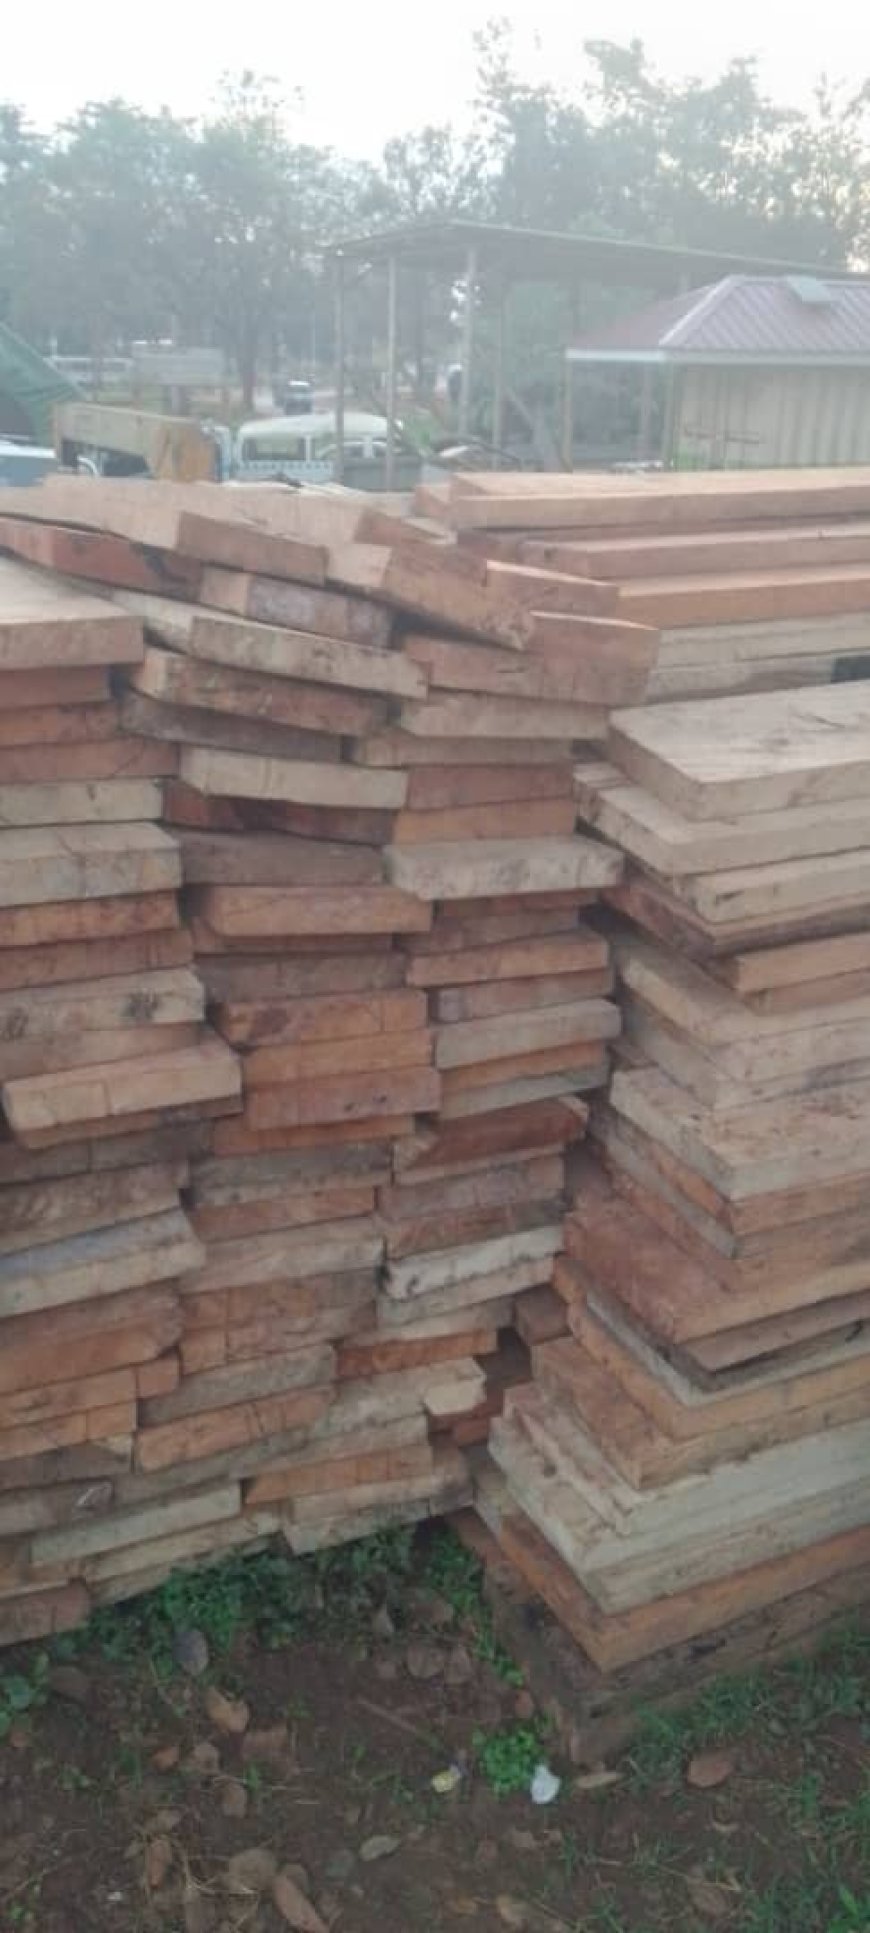 Four Held for Illegal Possession and Trading of Forestry Products